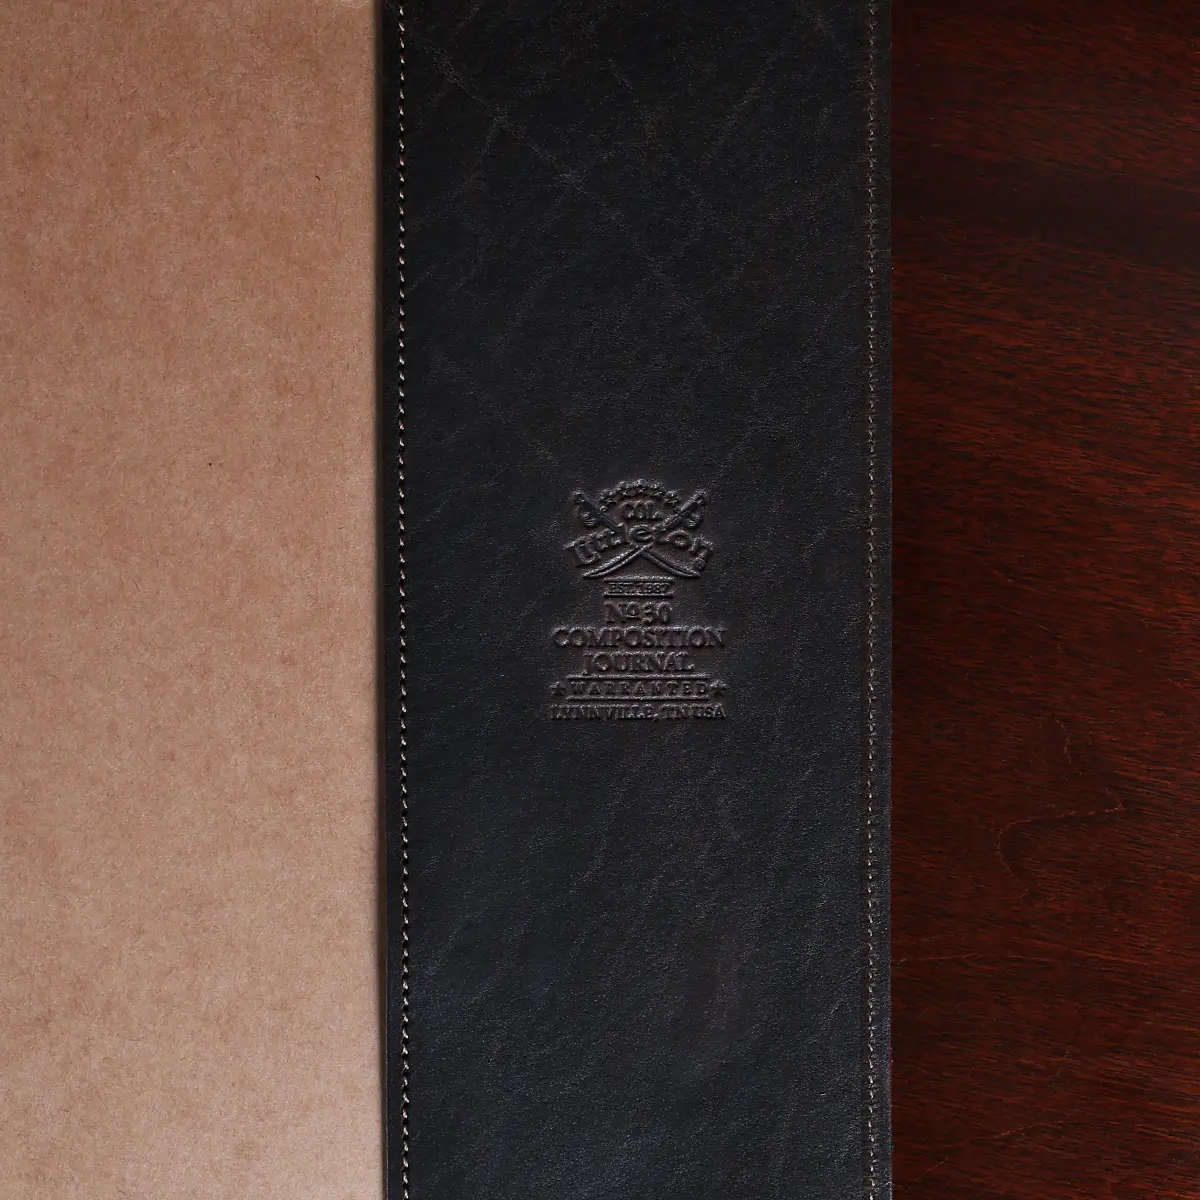 No. 20 Composition Journal in Vintage Brown American Alligator - ID 001 - logo view on a black background